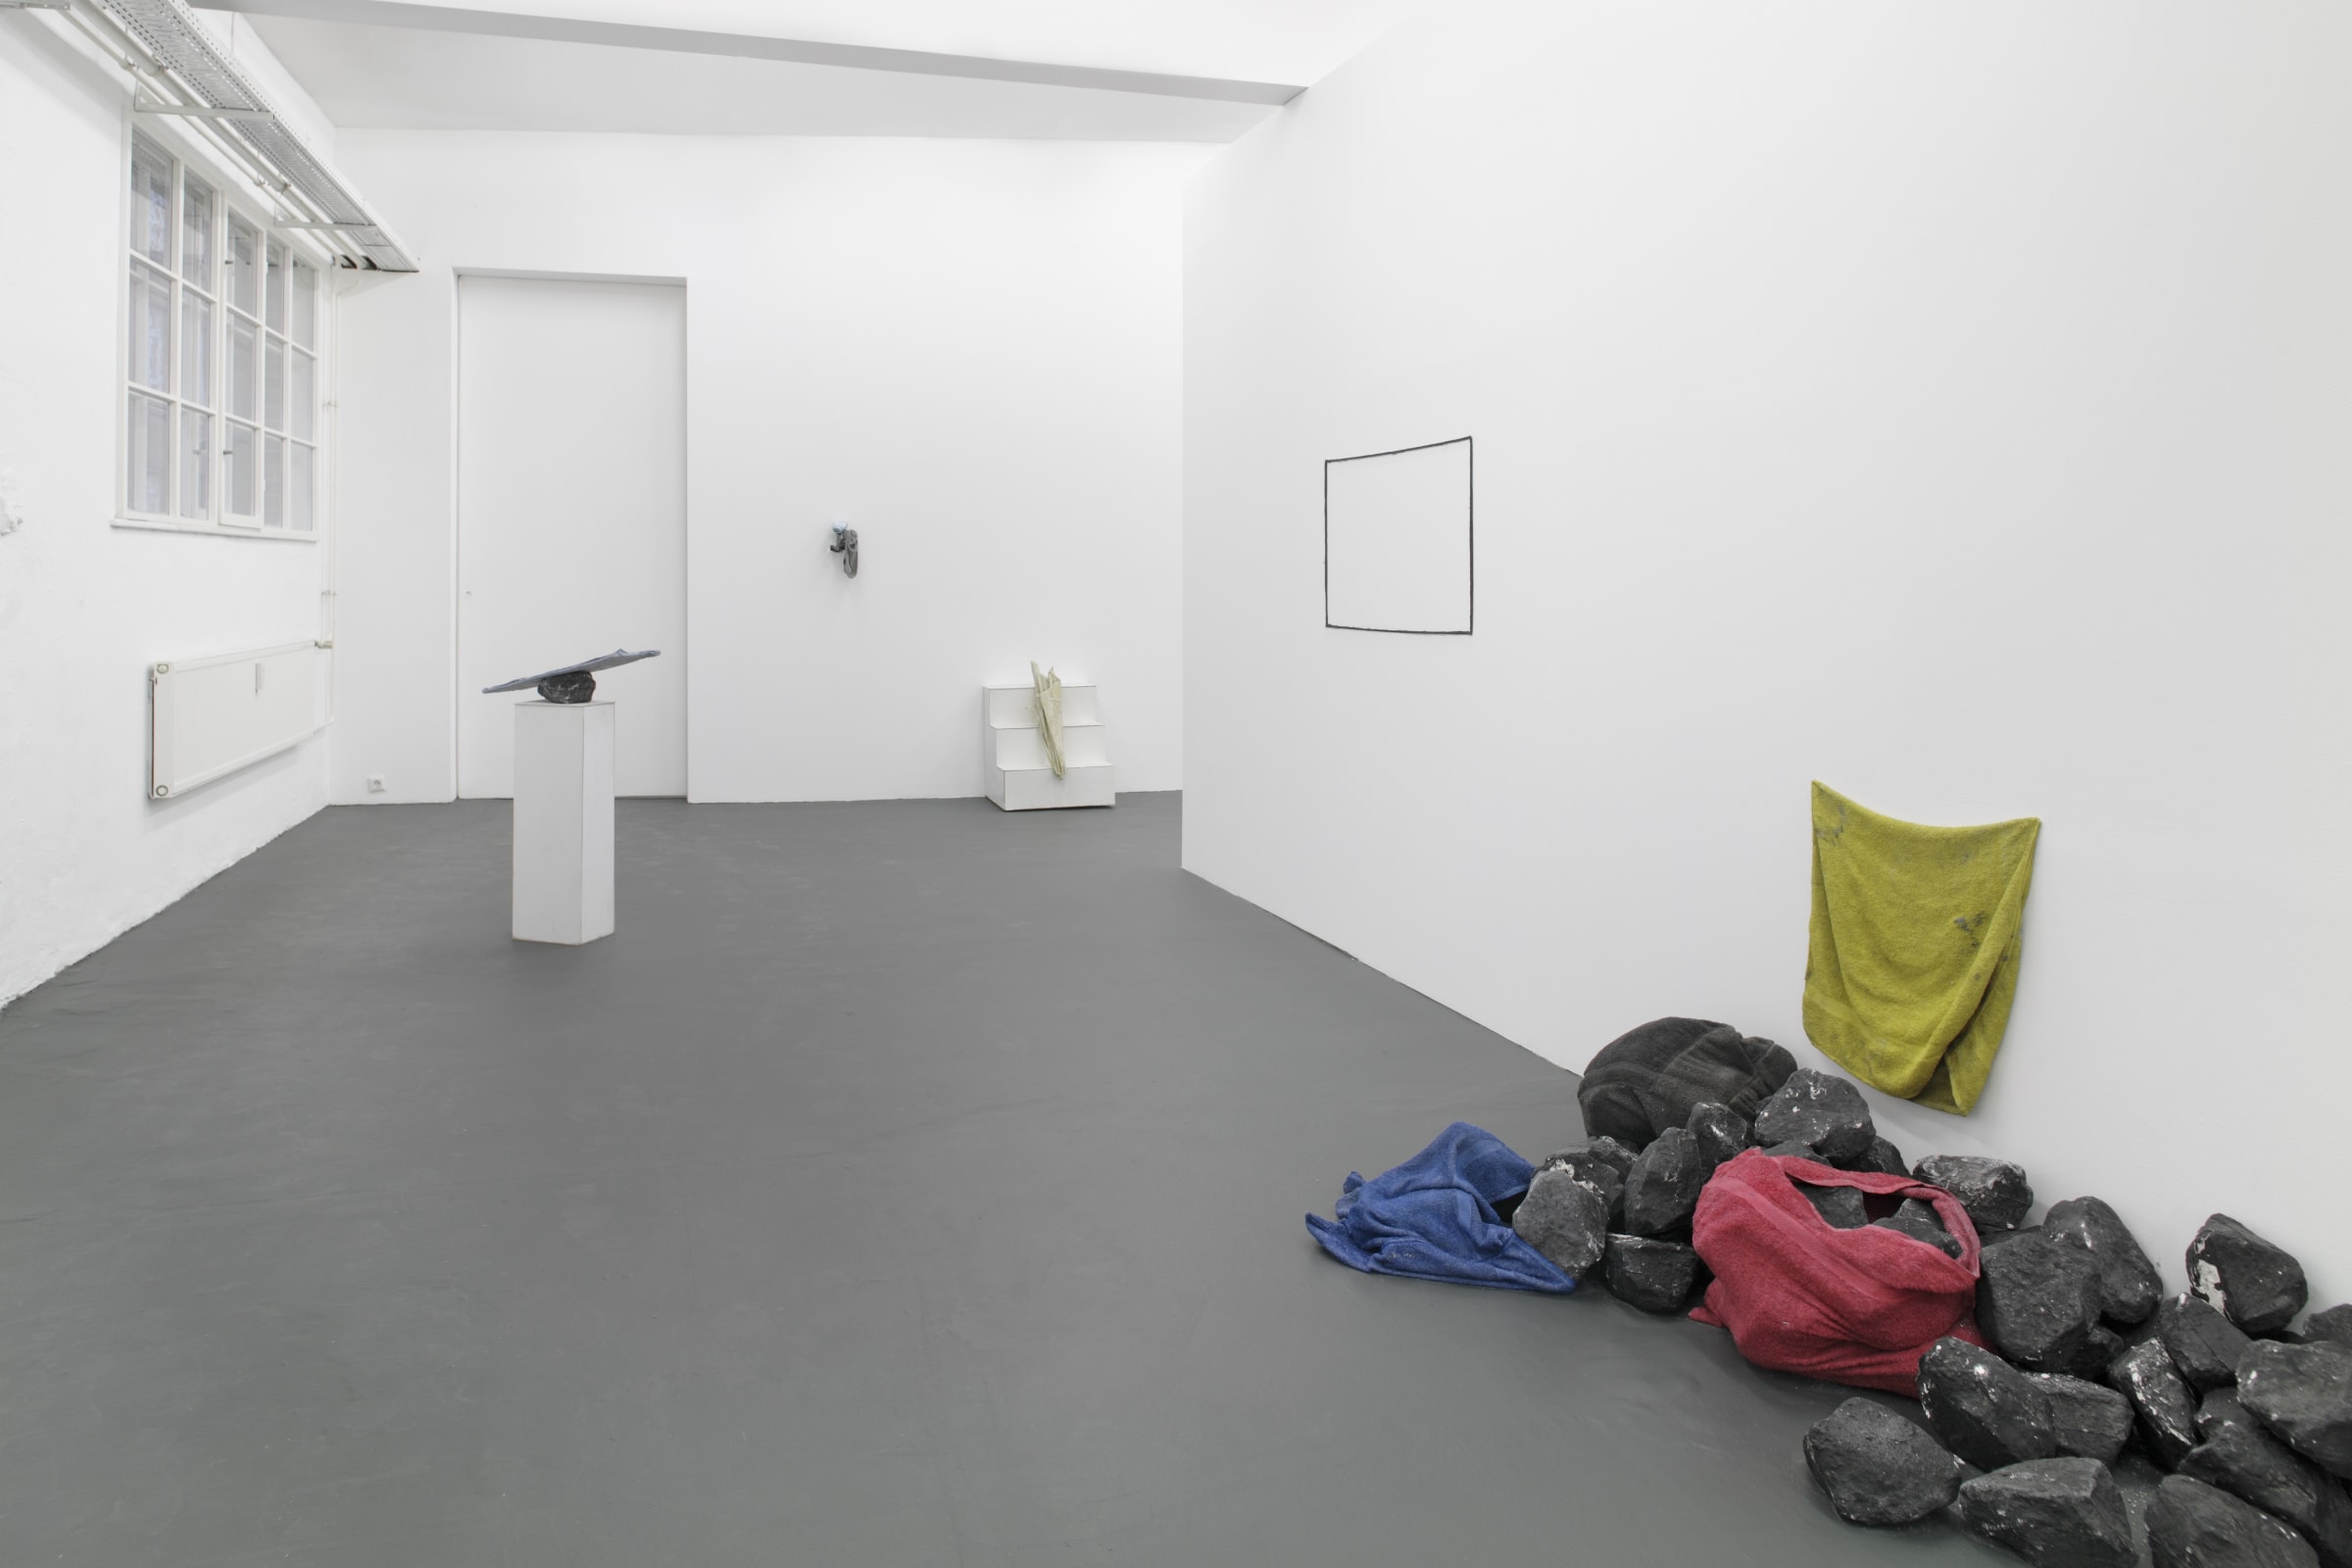 Paul Lee Harbour Installation View November 23 – January 19, 2008 Peres Projects, Berlin